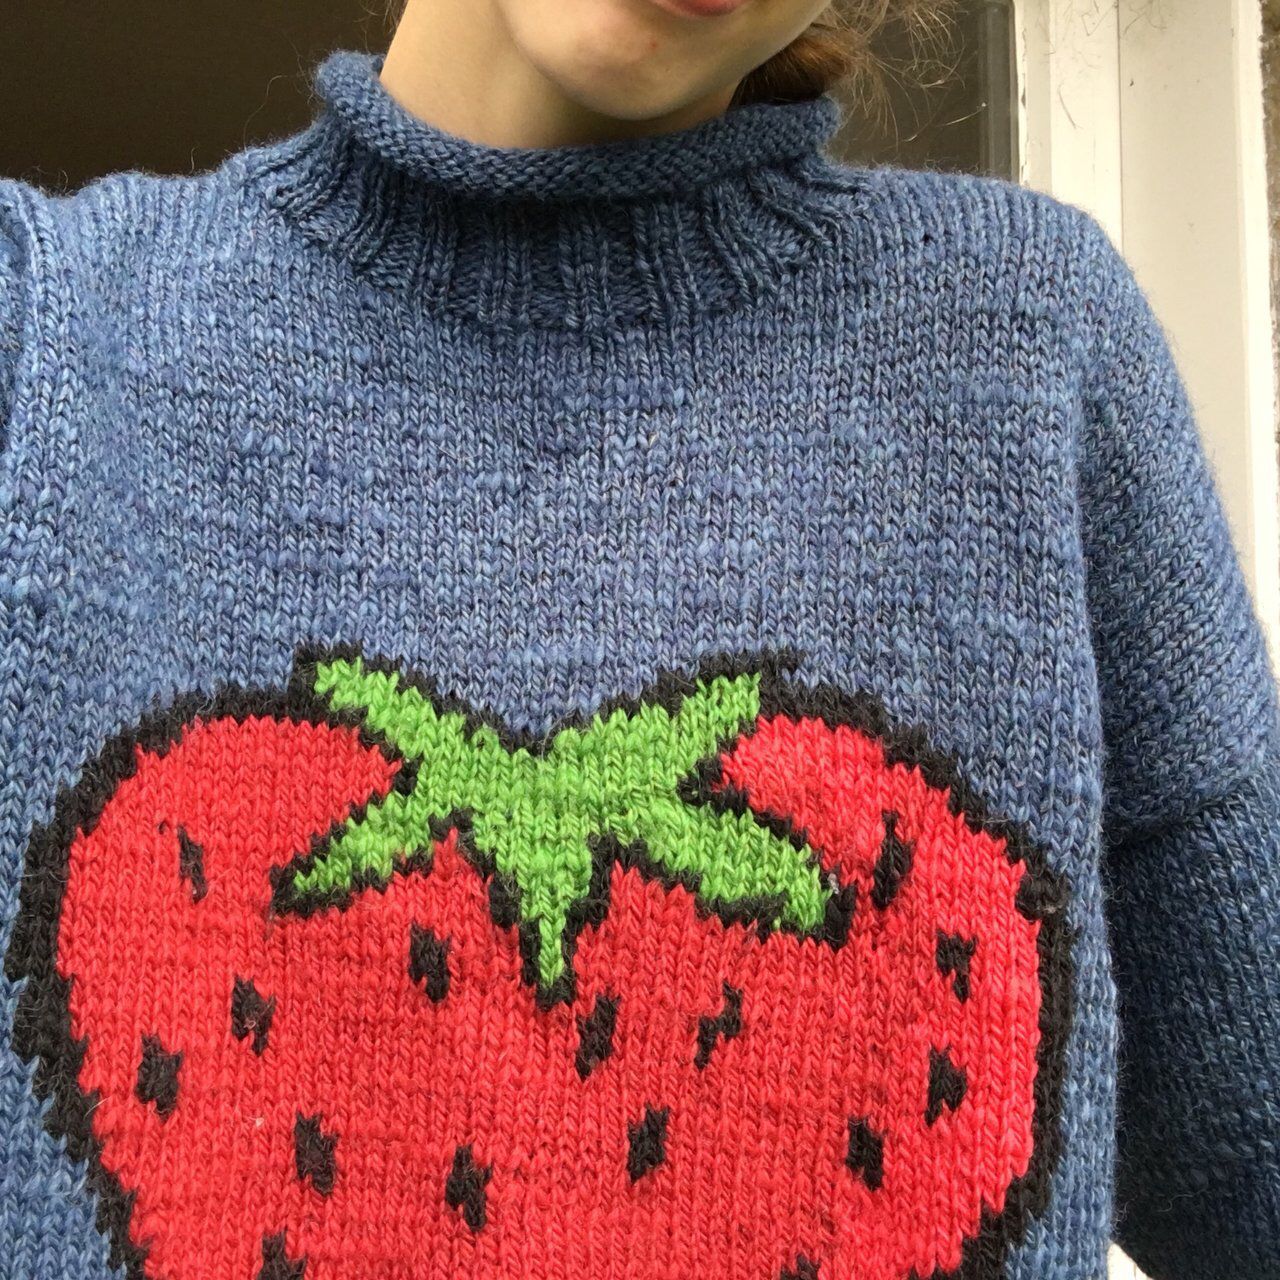 рџЌ“рџЌ“ Amaazziiing STRAWBERRY & blue roll neck 100% wool... - Depop -   17 DIY Clothes Sweater link ideas